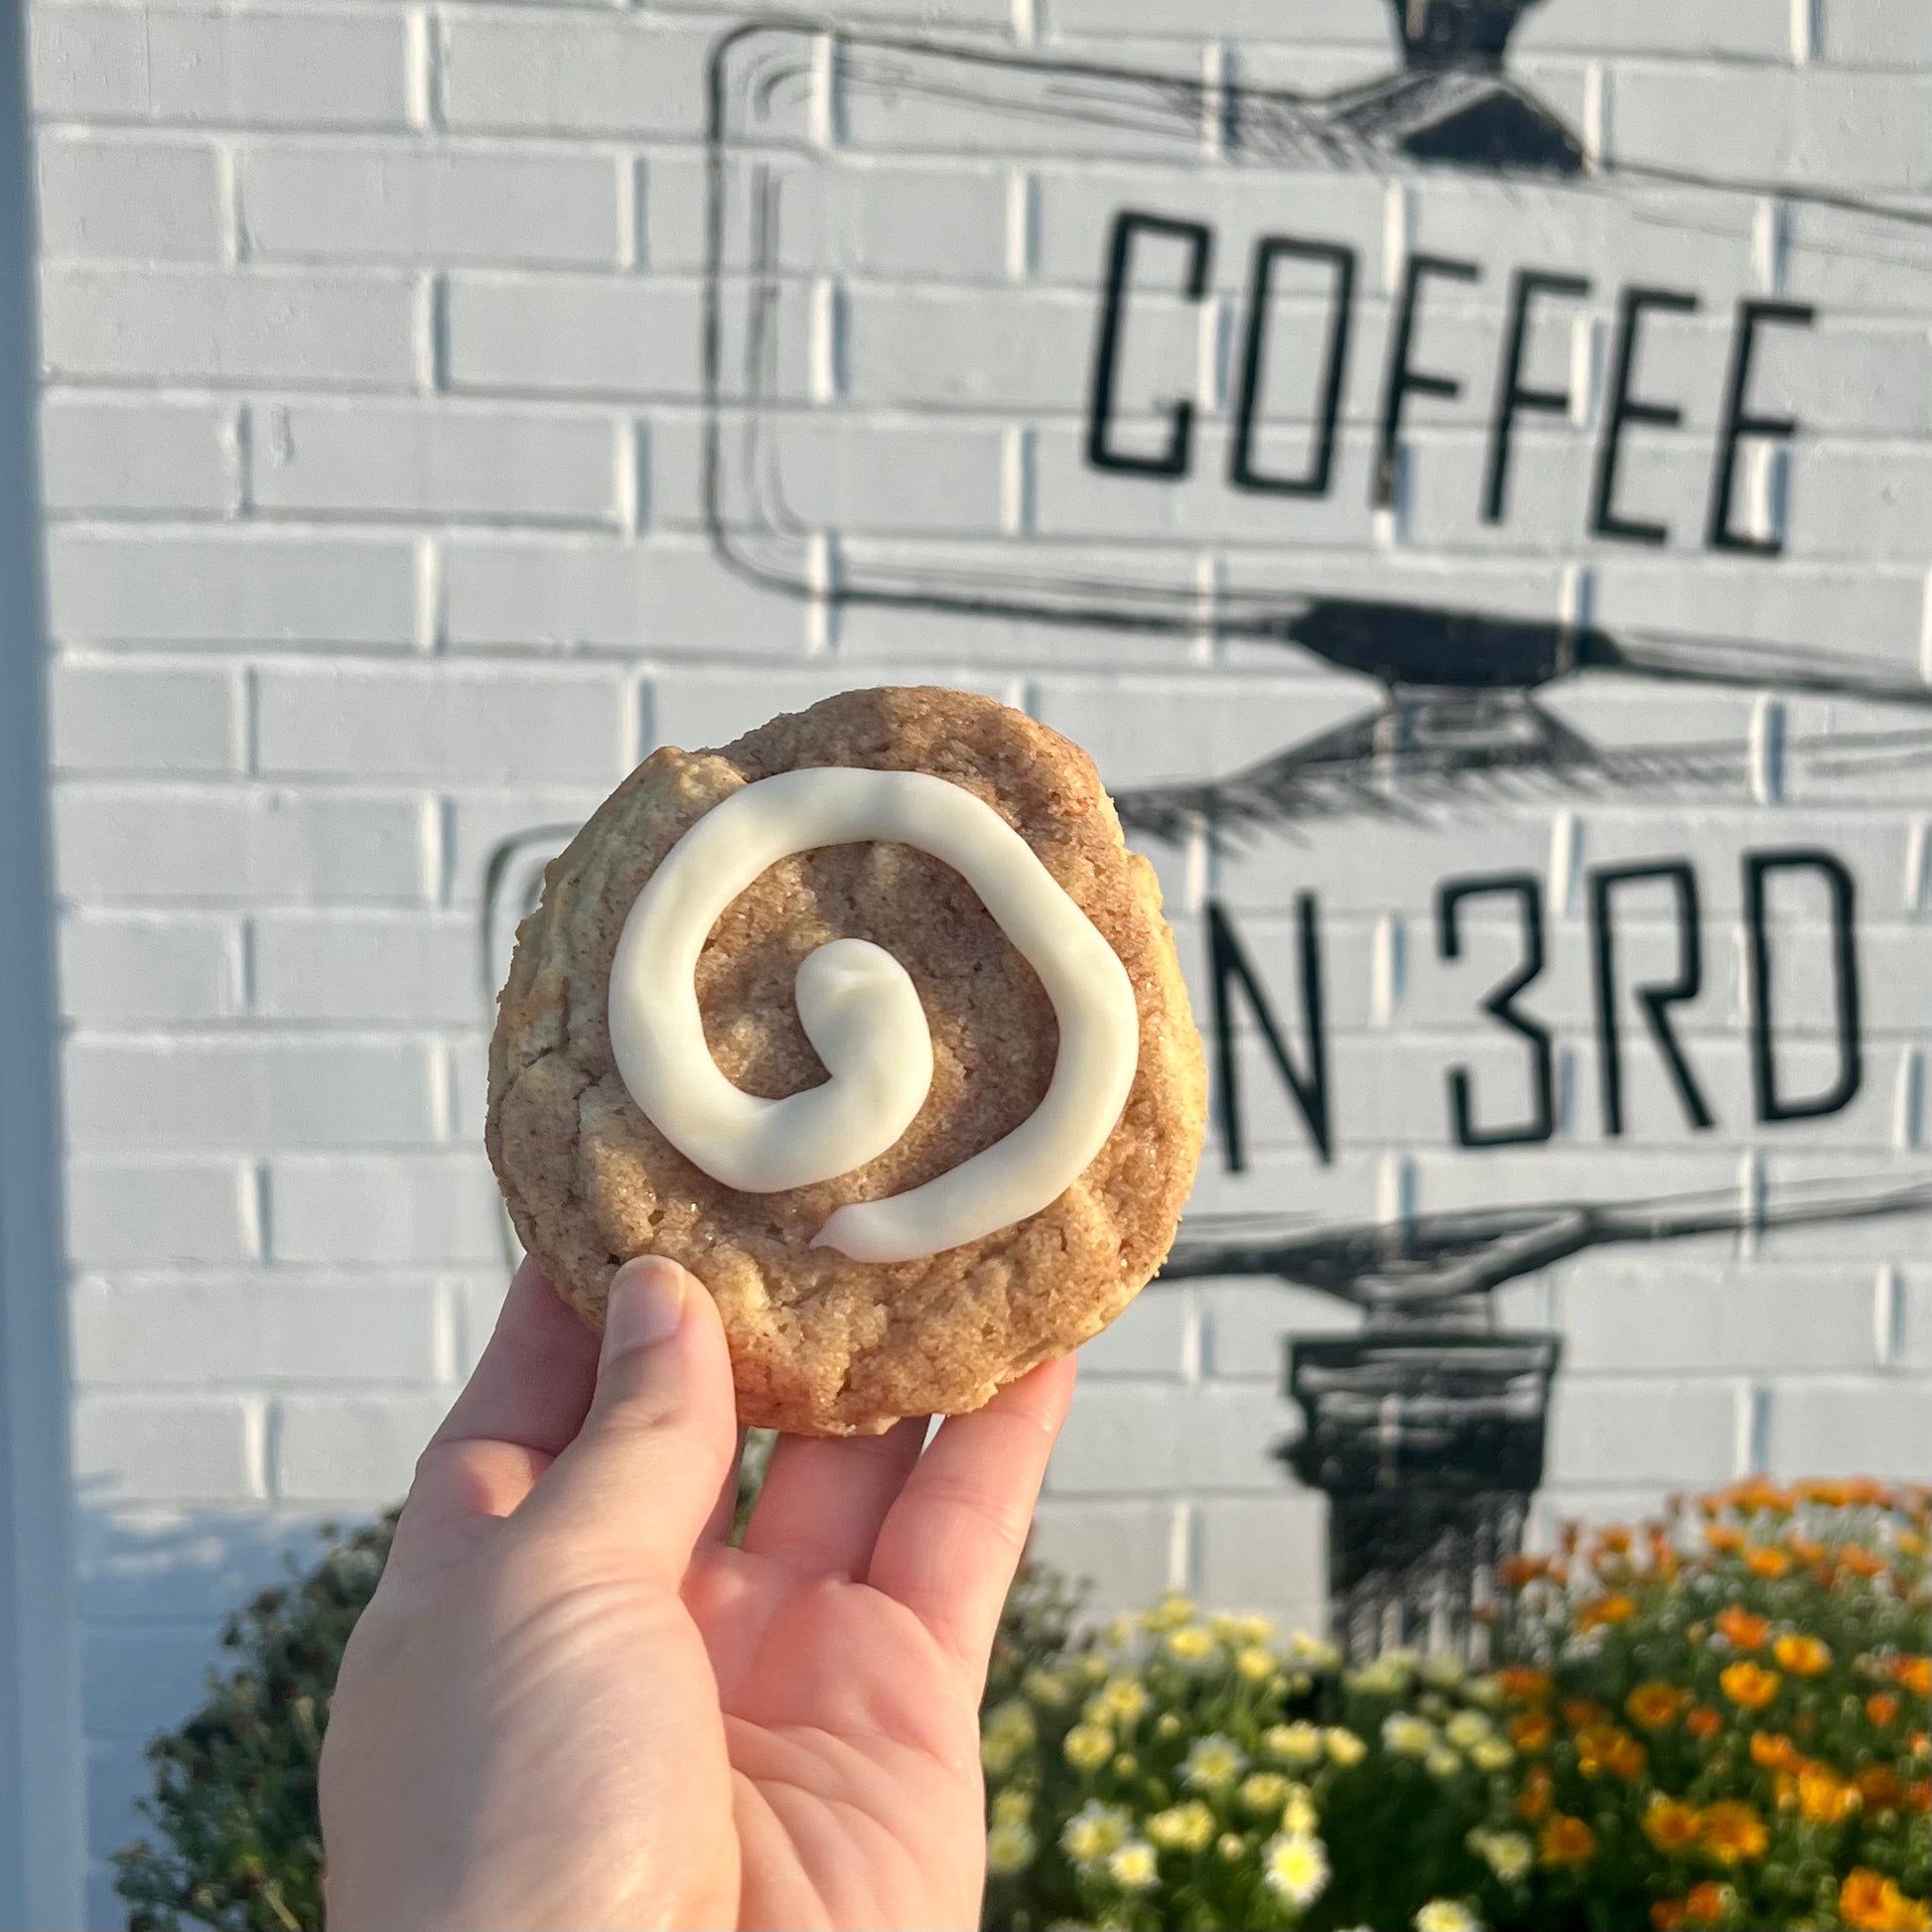 Are you ever craving a warm cinnamon roll, but don't have the time to go through all the hassle of baking one? Try one of our signature Cinnamon Roll Delight cookies instead! This perfect balance between cinnamon and cream cheese frosting is sure to satisfy that craving.